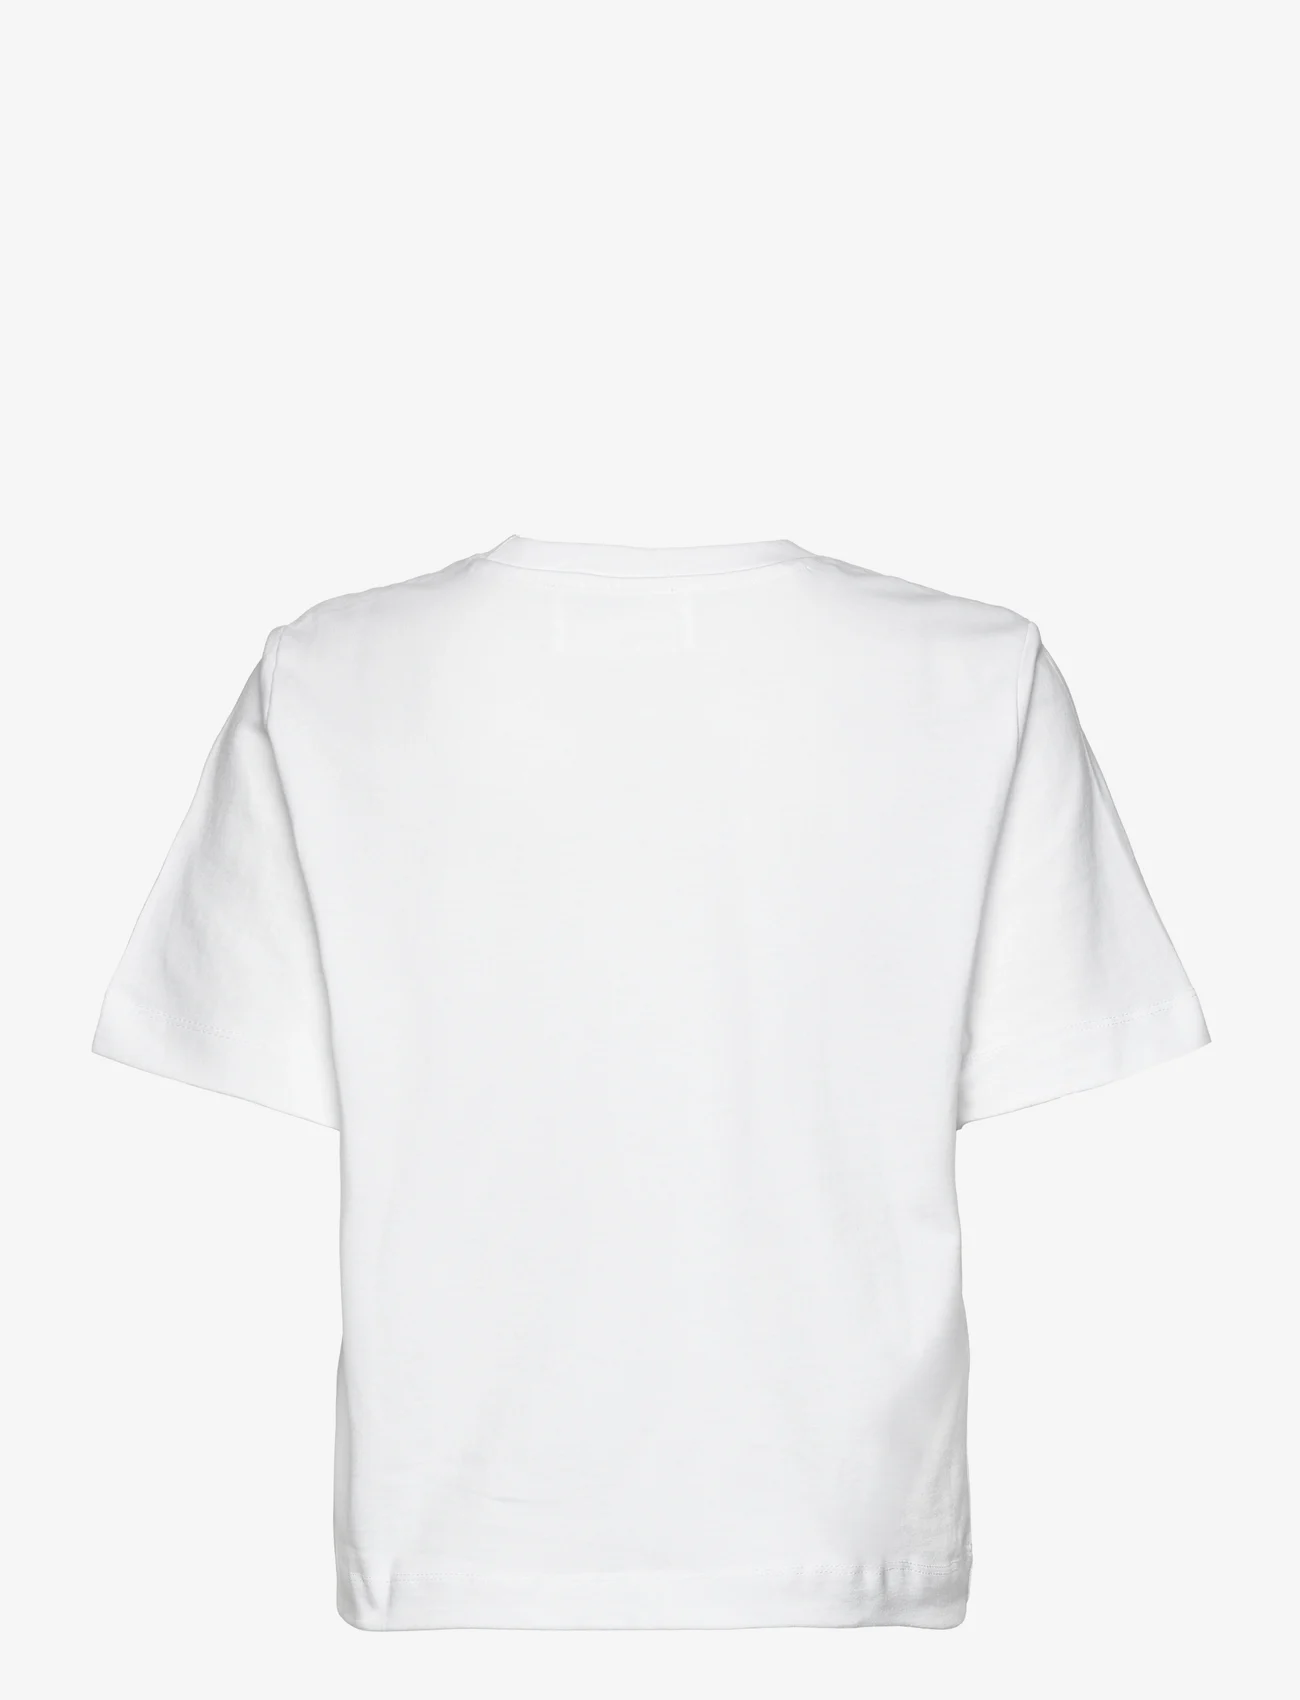 Selected Femme - SLFESSENTIAL SS BOXY TEE NOOS - najniższe ceny - bright white - 1